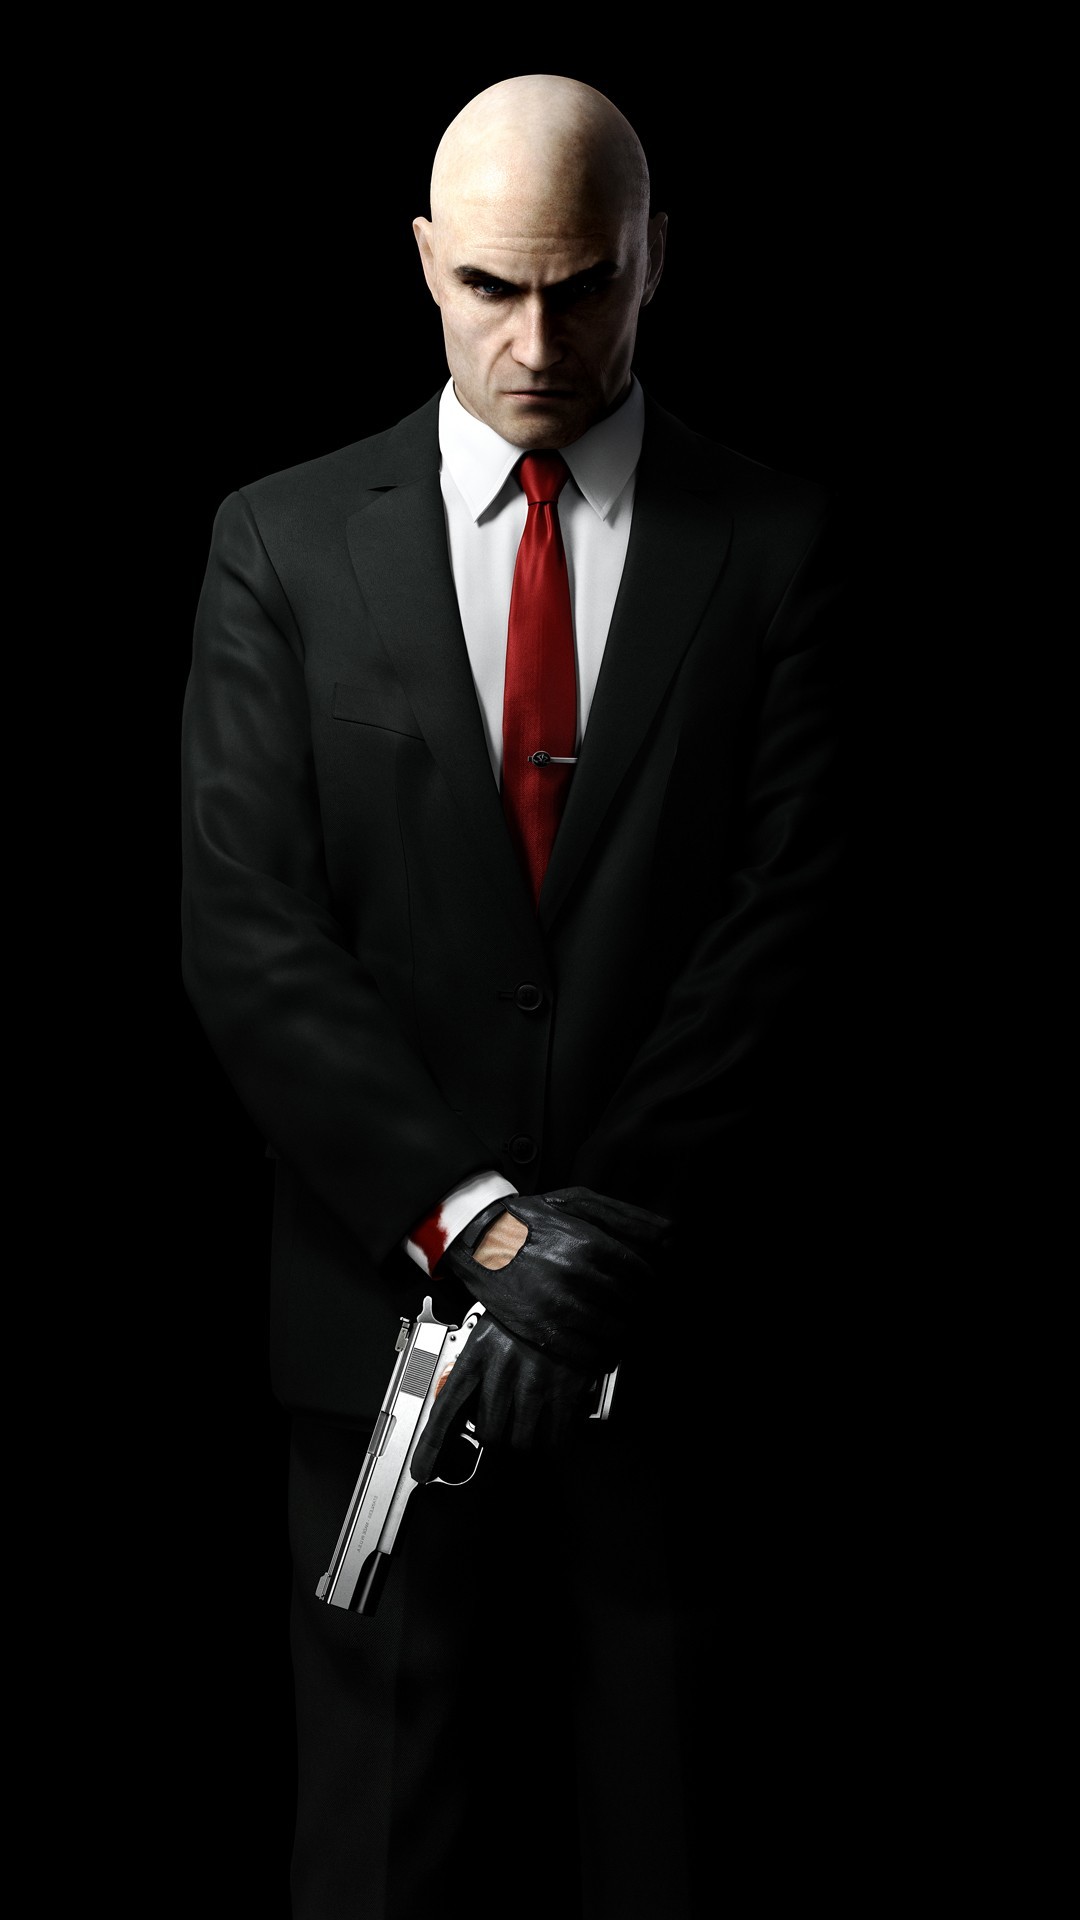 Hitman Absolution Wallpaper 1080p Car Pictures